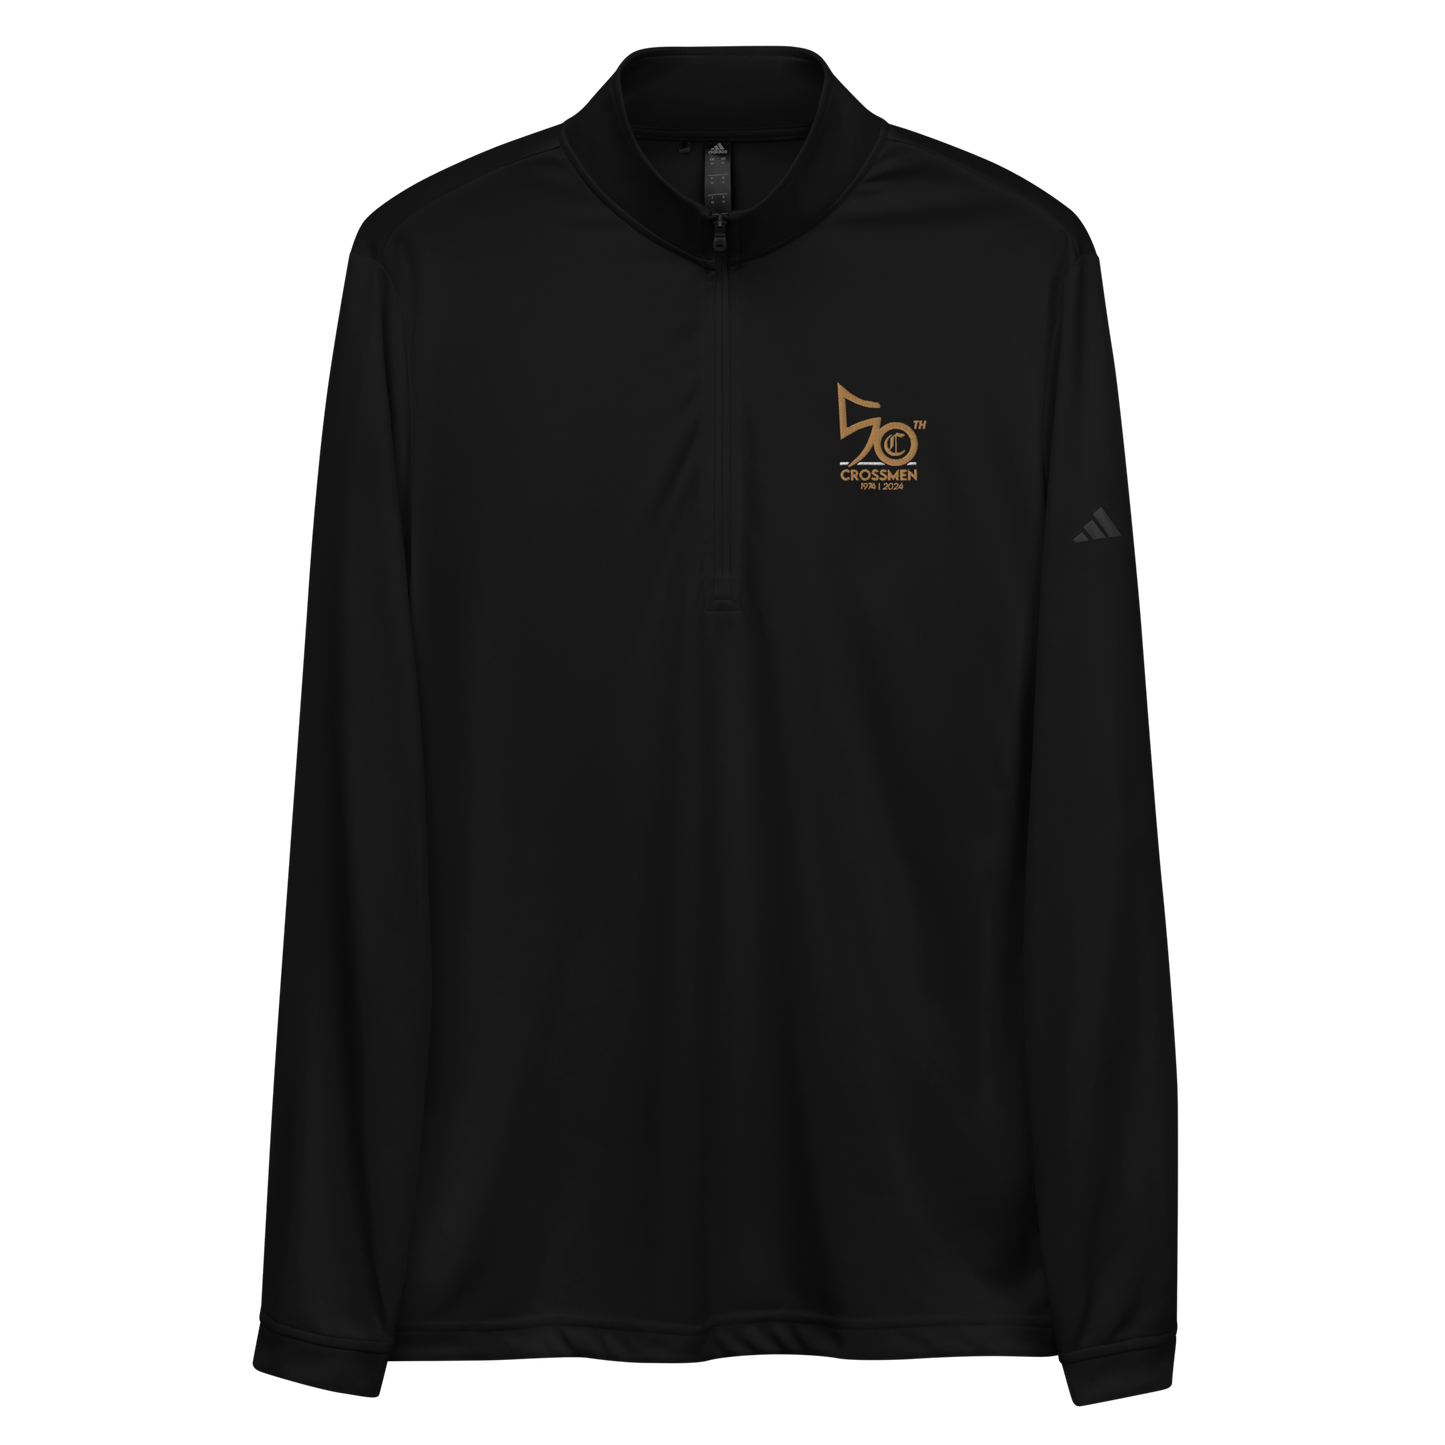 50th Anniversary Embroidered Quarter zip pullover